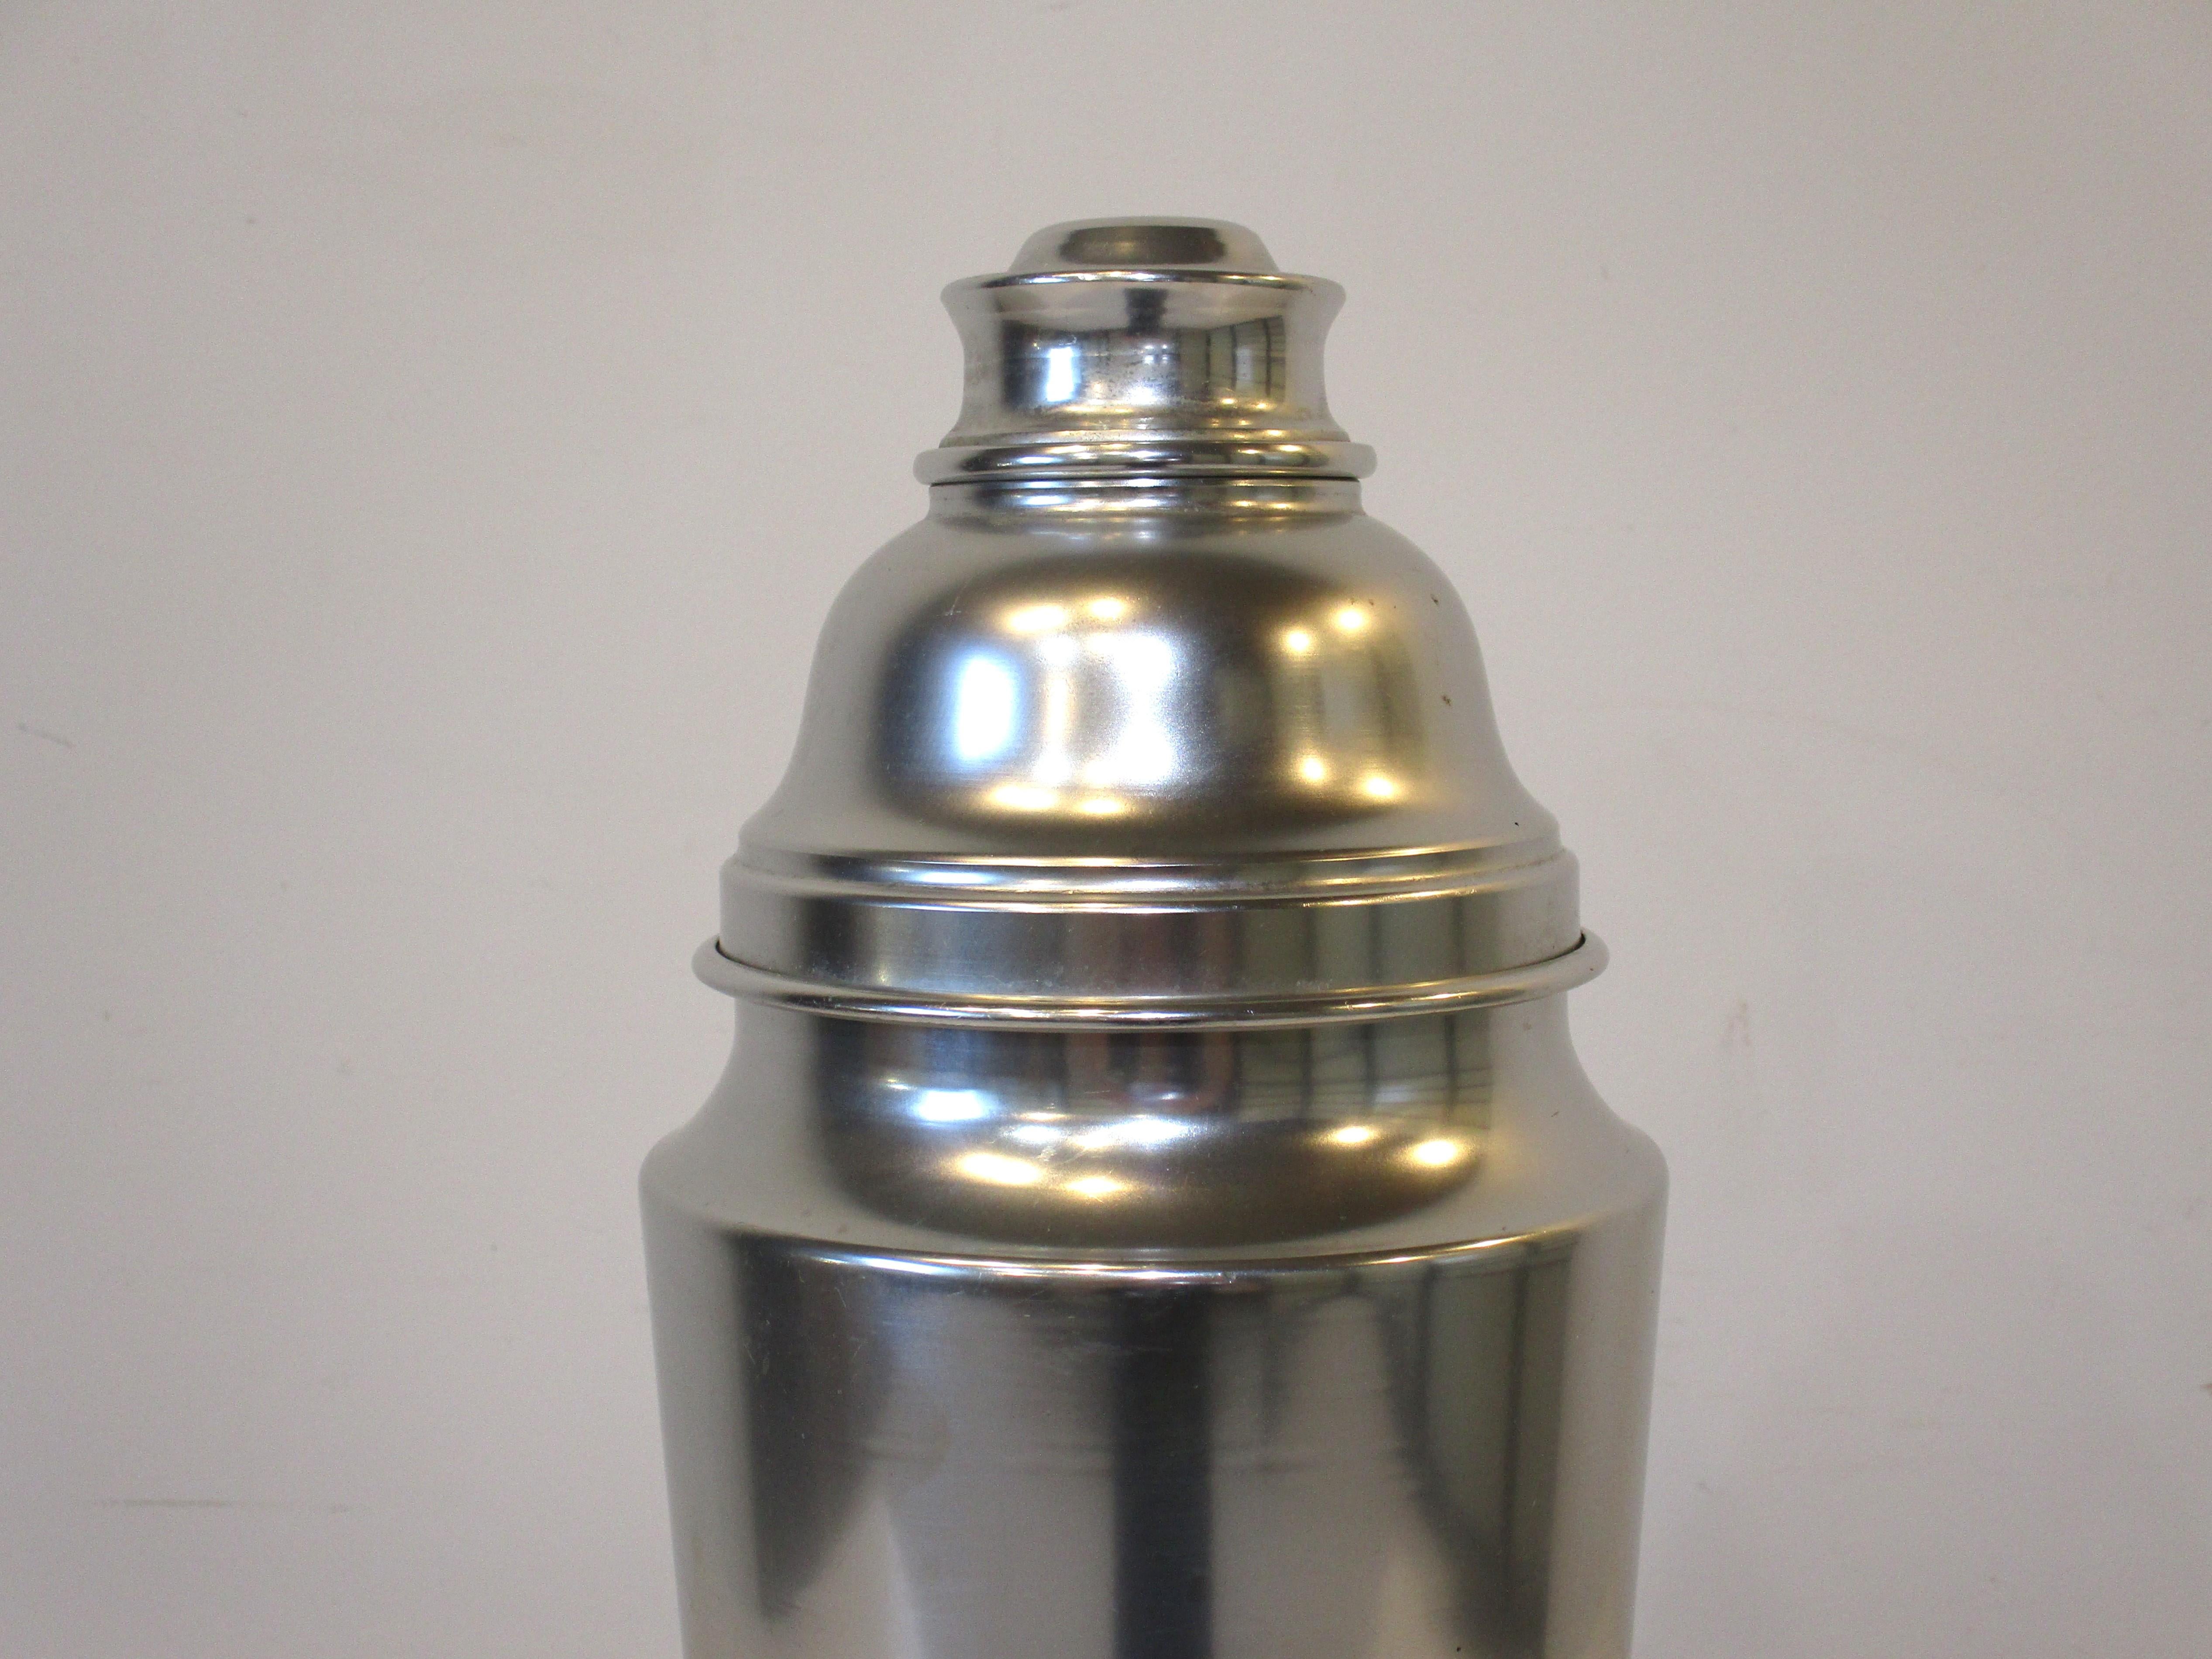 A very large jumbo sized cocktail shaker formed in aluminum with large top and built in strainer with cap. This is your summer party sized mixer shaker or called a hotel shaker that would be used in their bar to server a room full of customers.